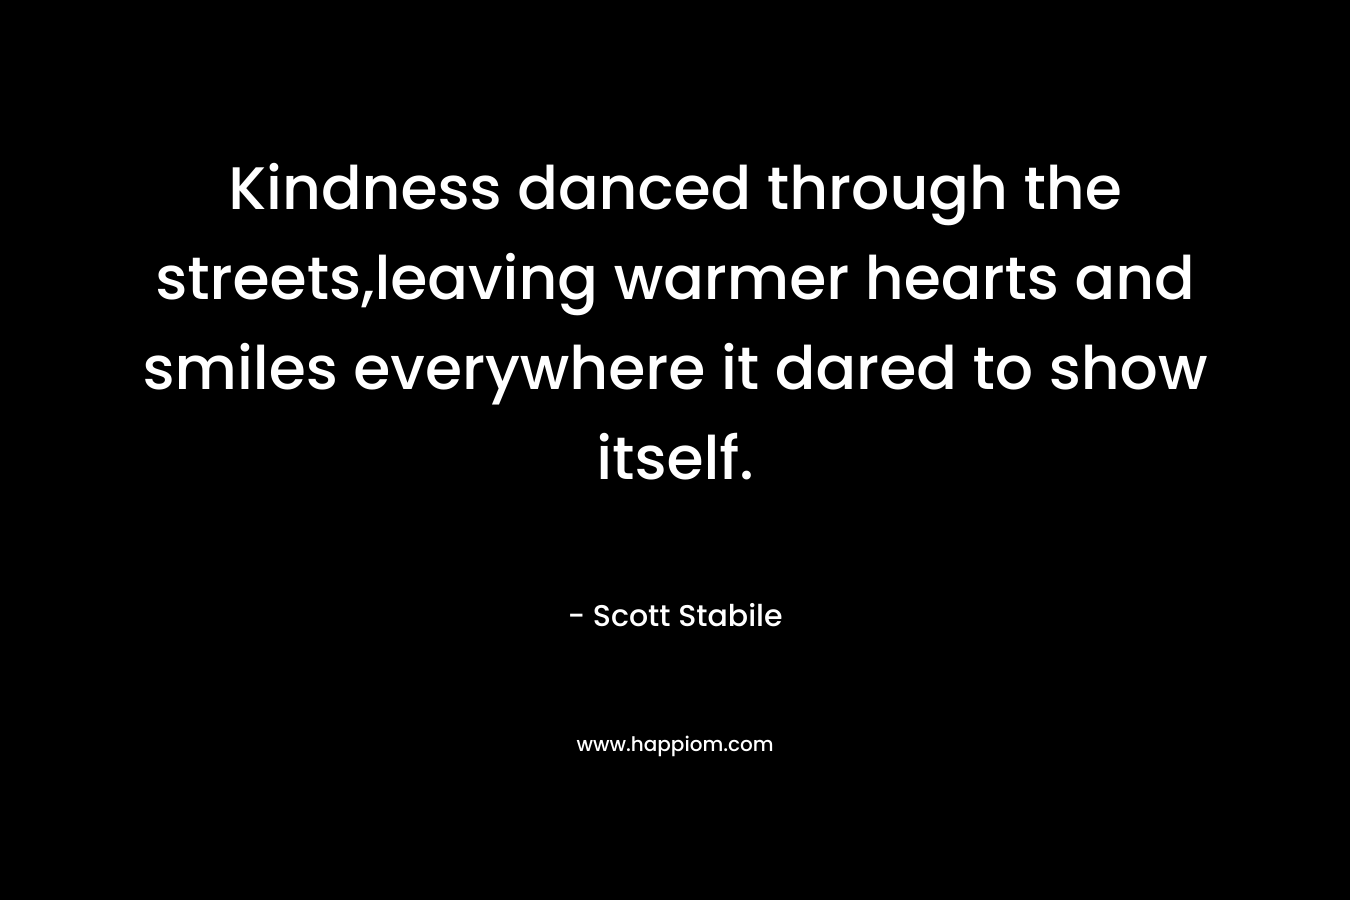 Kindness danced through the streets,leaving warmer hearts and smiles everywhere it dared to show itself.